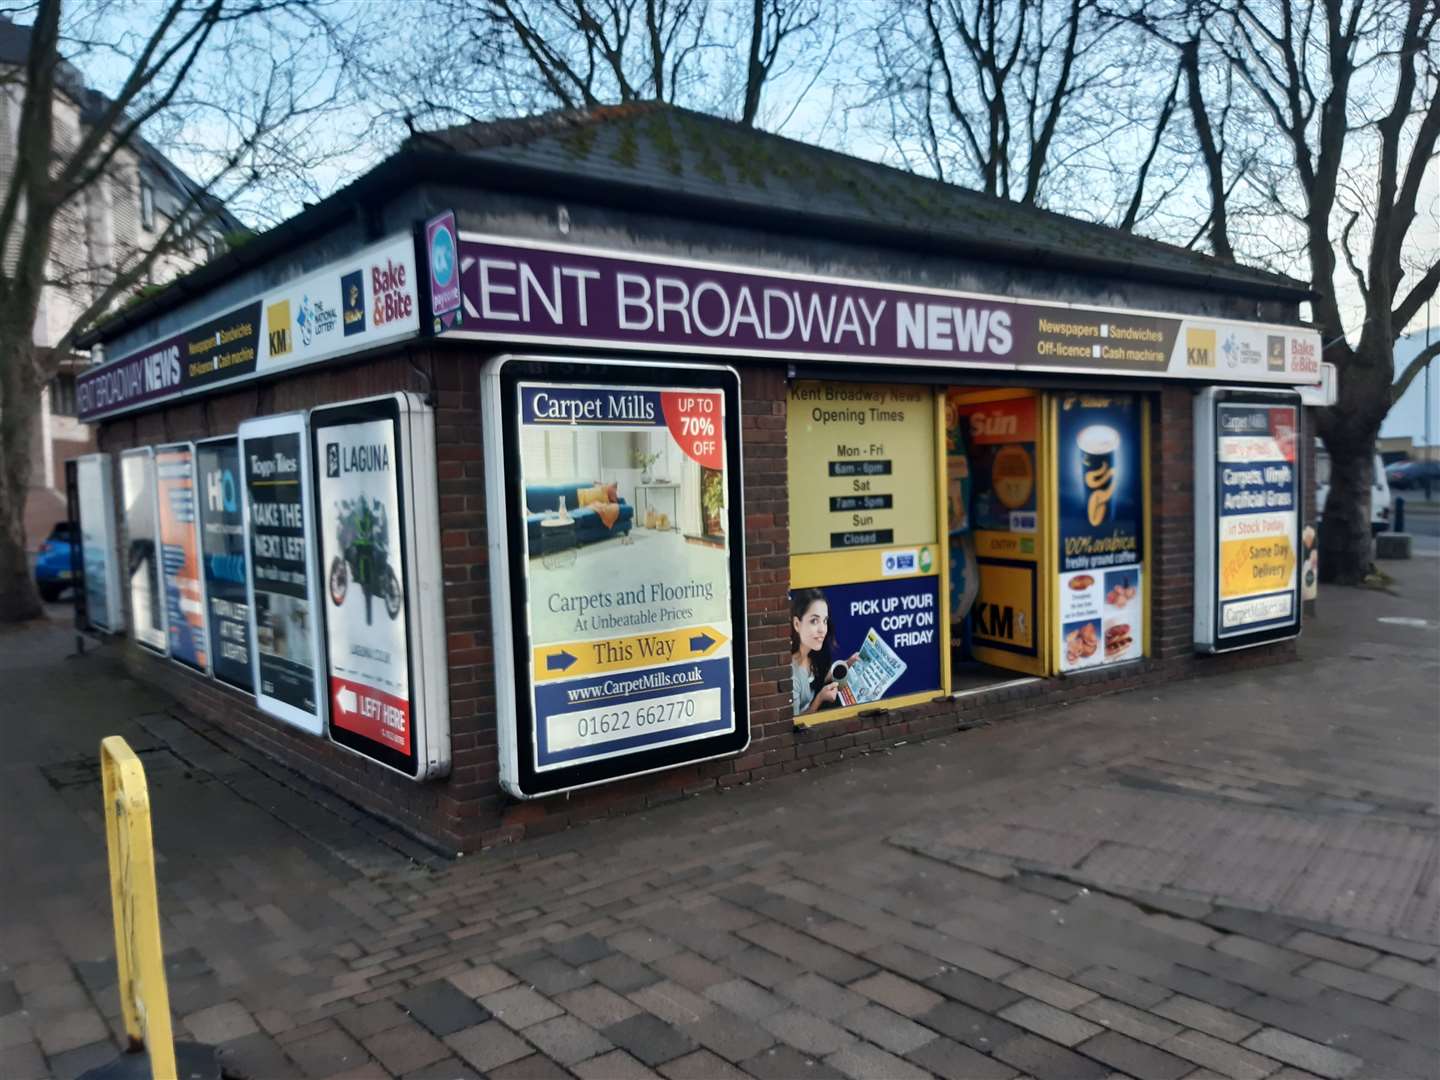 The Kent Broadway News shop in Maidstone